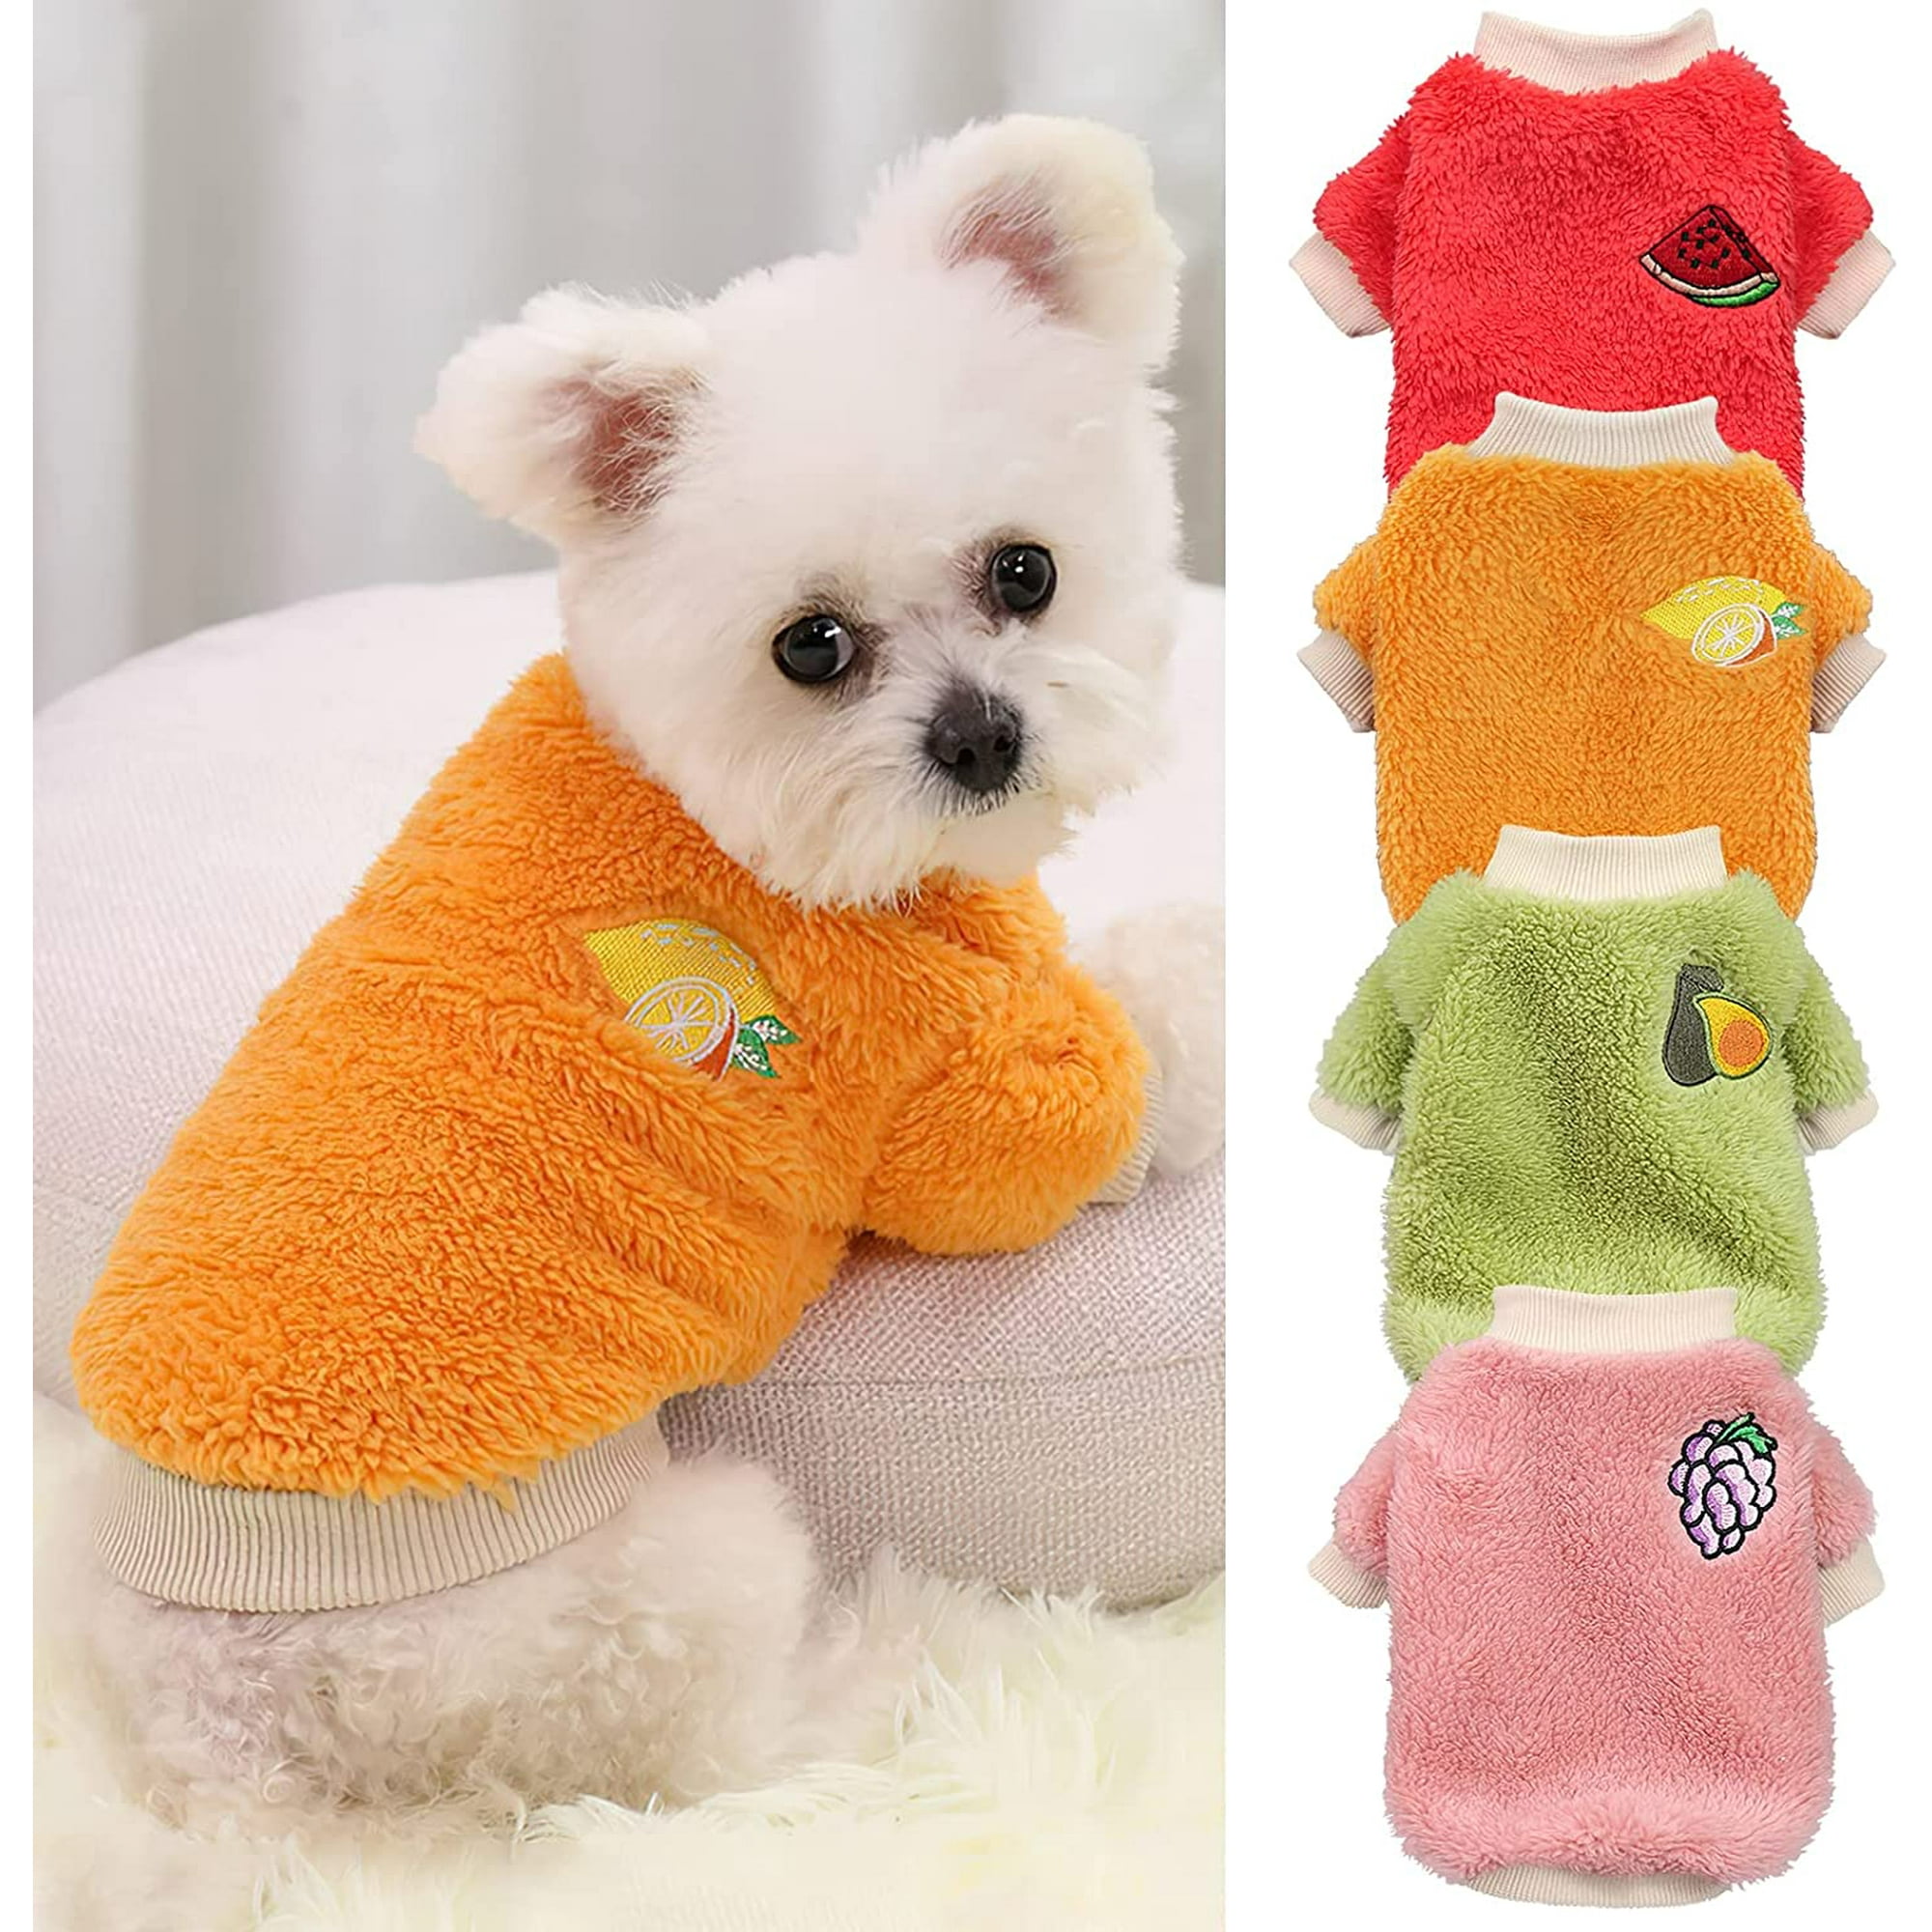 QWZNDZGR Dog Sweaters for Small Dogs, Pet Girl Dog Clothes, Fleece Puppy  Sweater for Extra Small Dogs, Cold Weather Chihuahua Sweater Teacup Yorkie